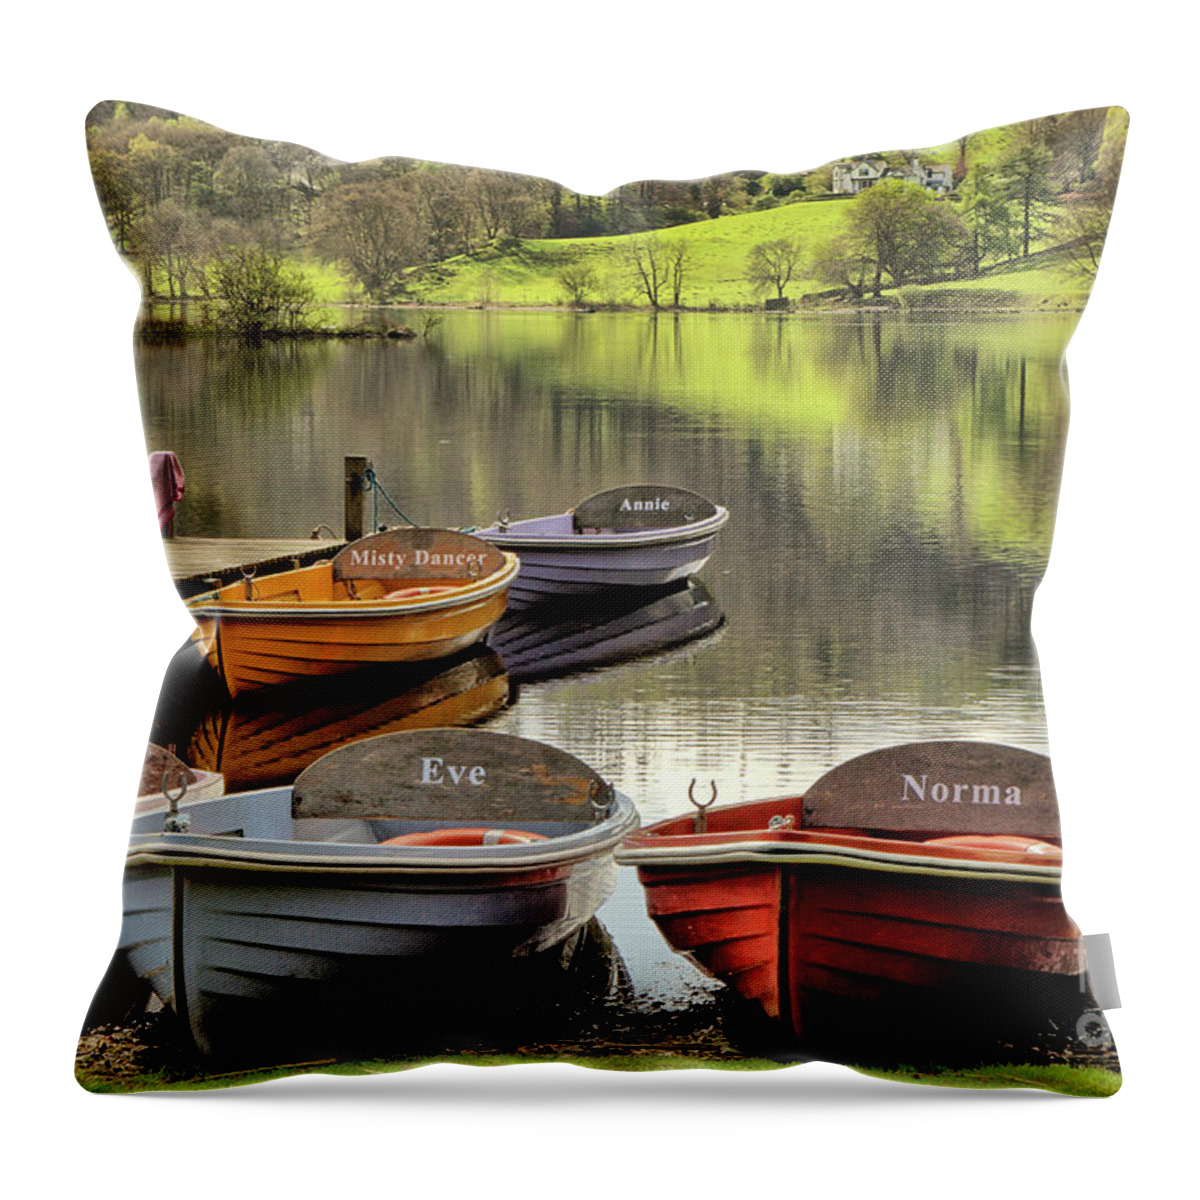 Grasmere Throw Pillow featuring the photograph Grasmere by Smart Aviation